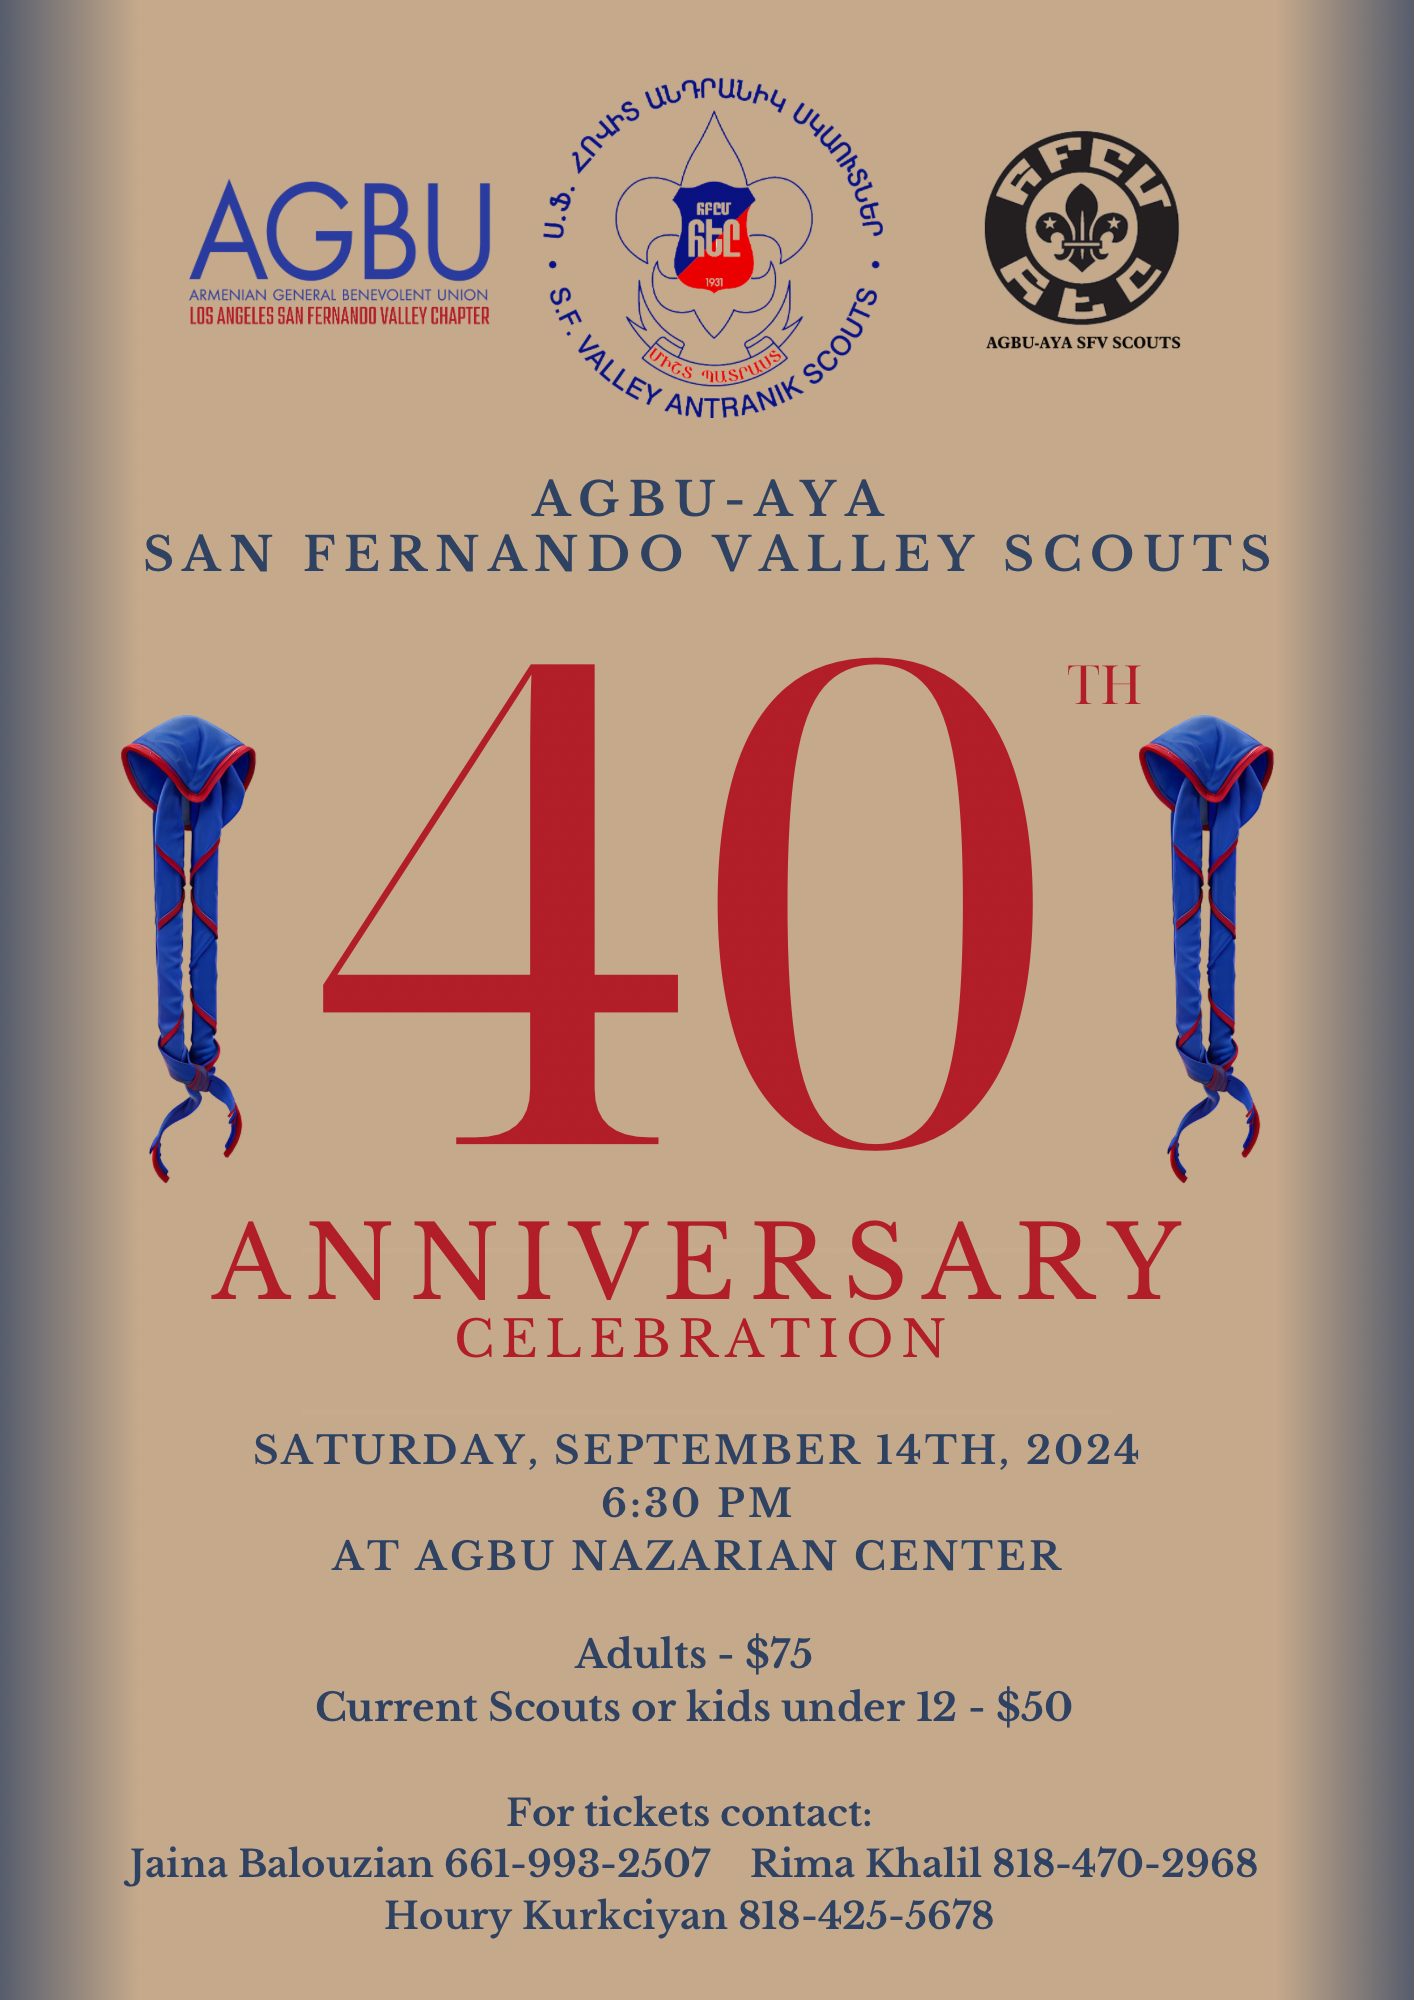 40th Anniversary of the Foundation of the AGBU-AYA Valley Scouts